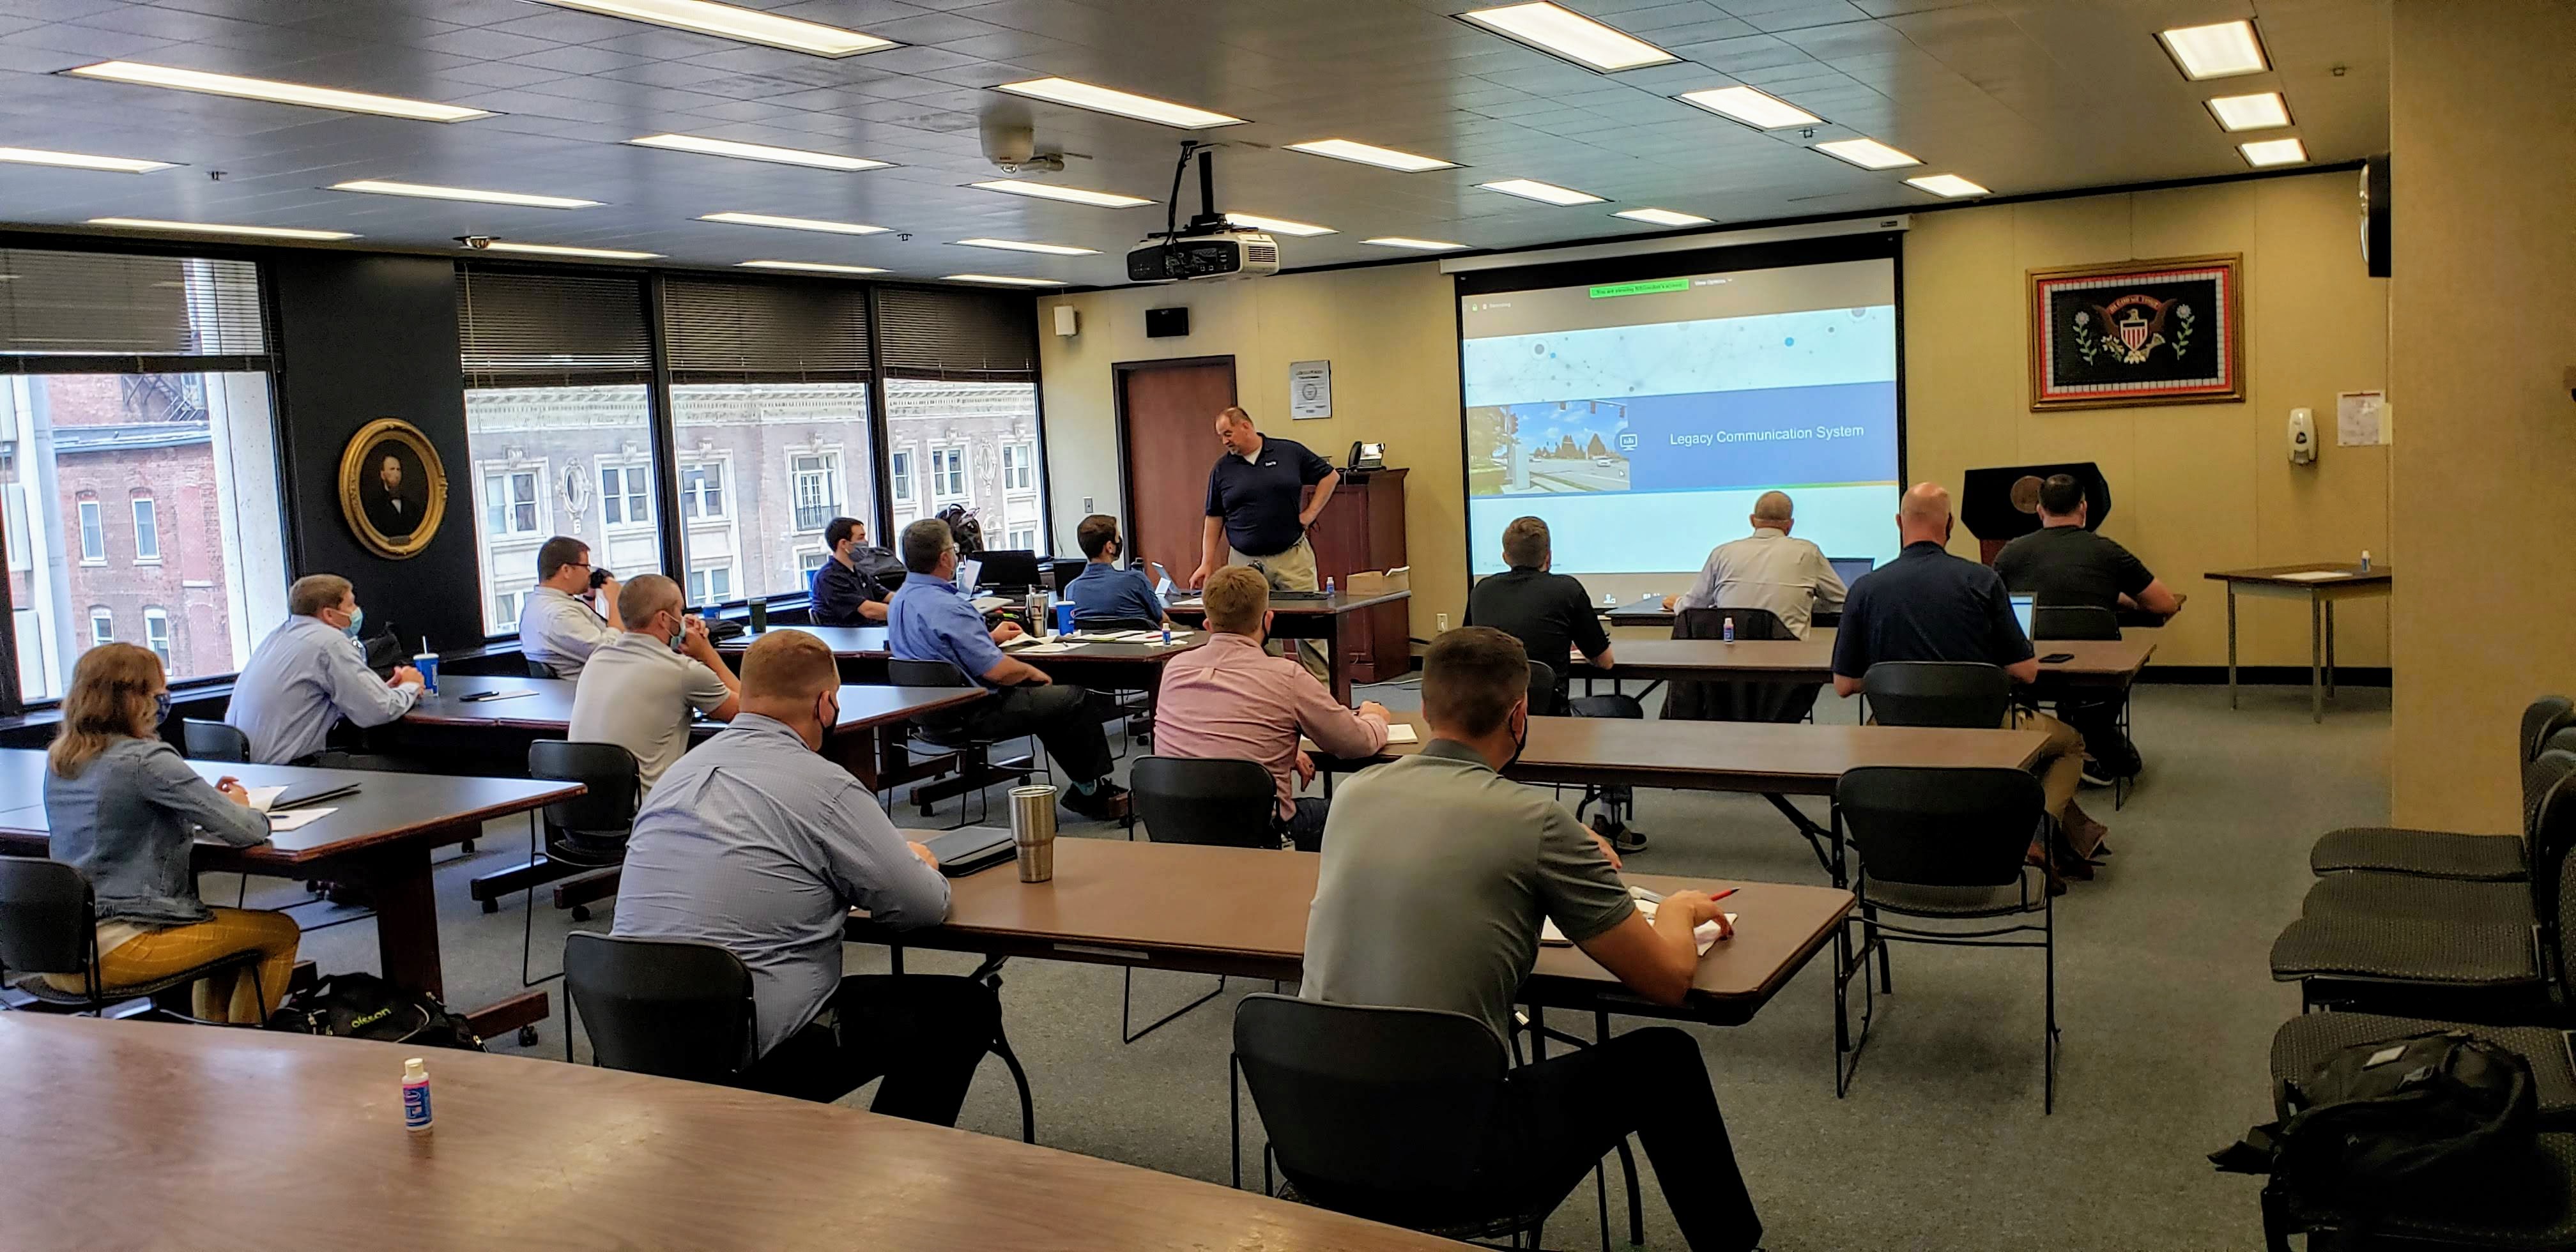 Iteris’ Steven Garbe leads a course on communications to local professionals in the City of Omaha, Nebraska. 